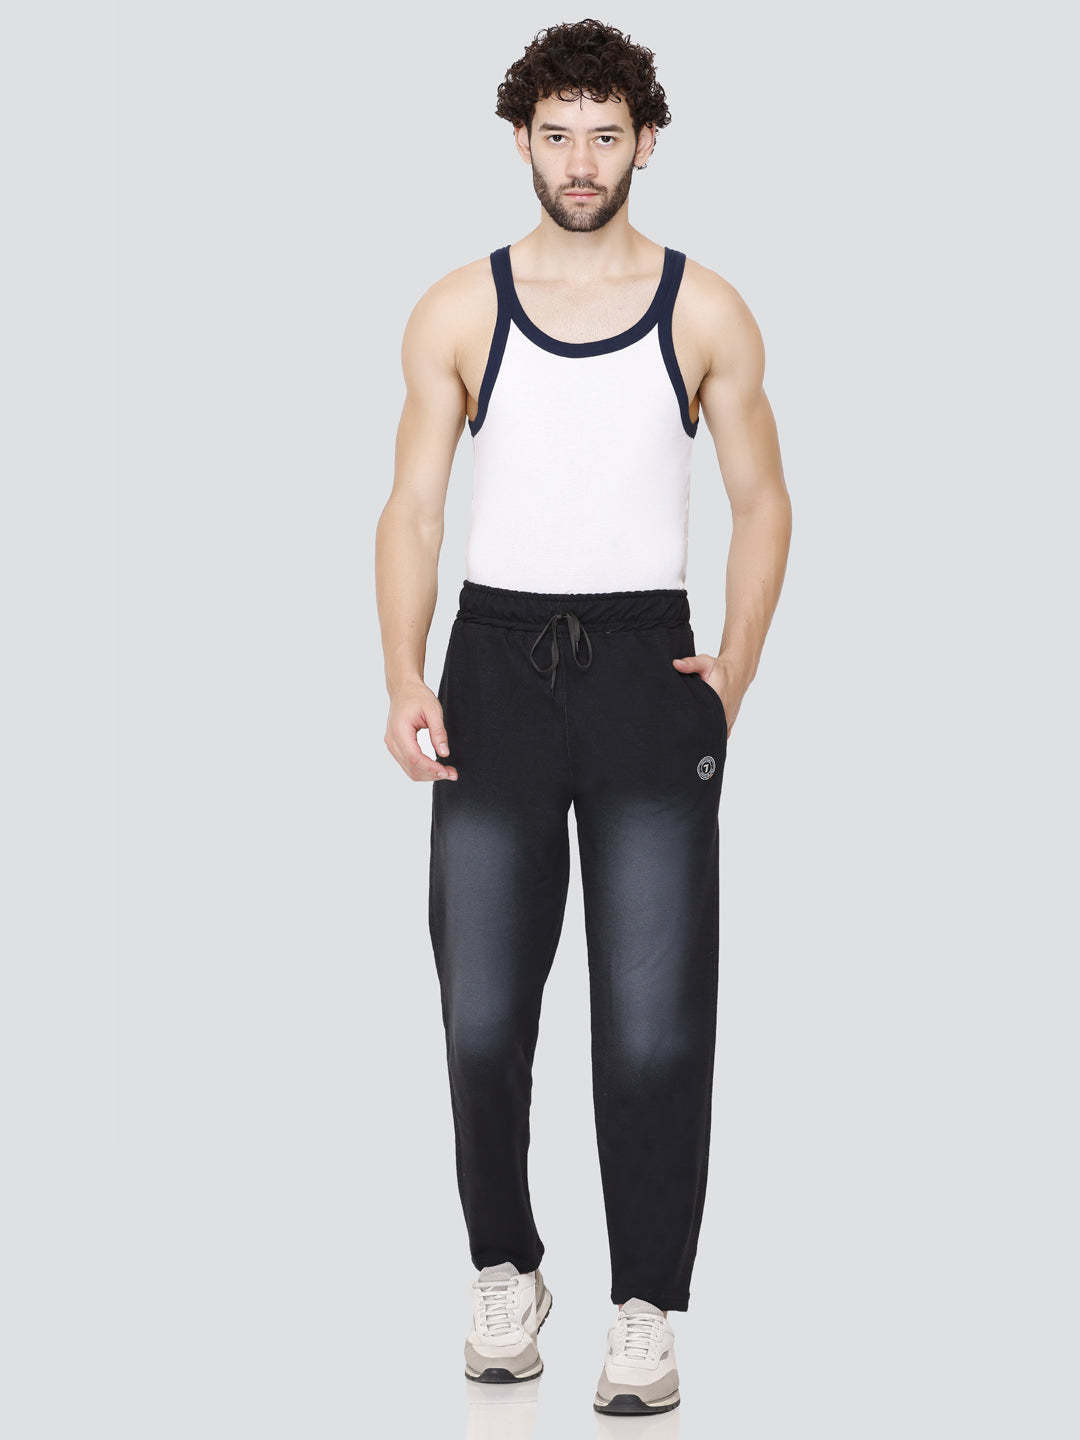 Stylish Denim Shaded Jinxer Cotton Trackpants for Men online in India